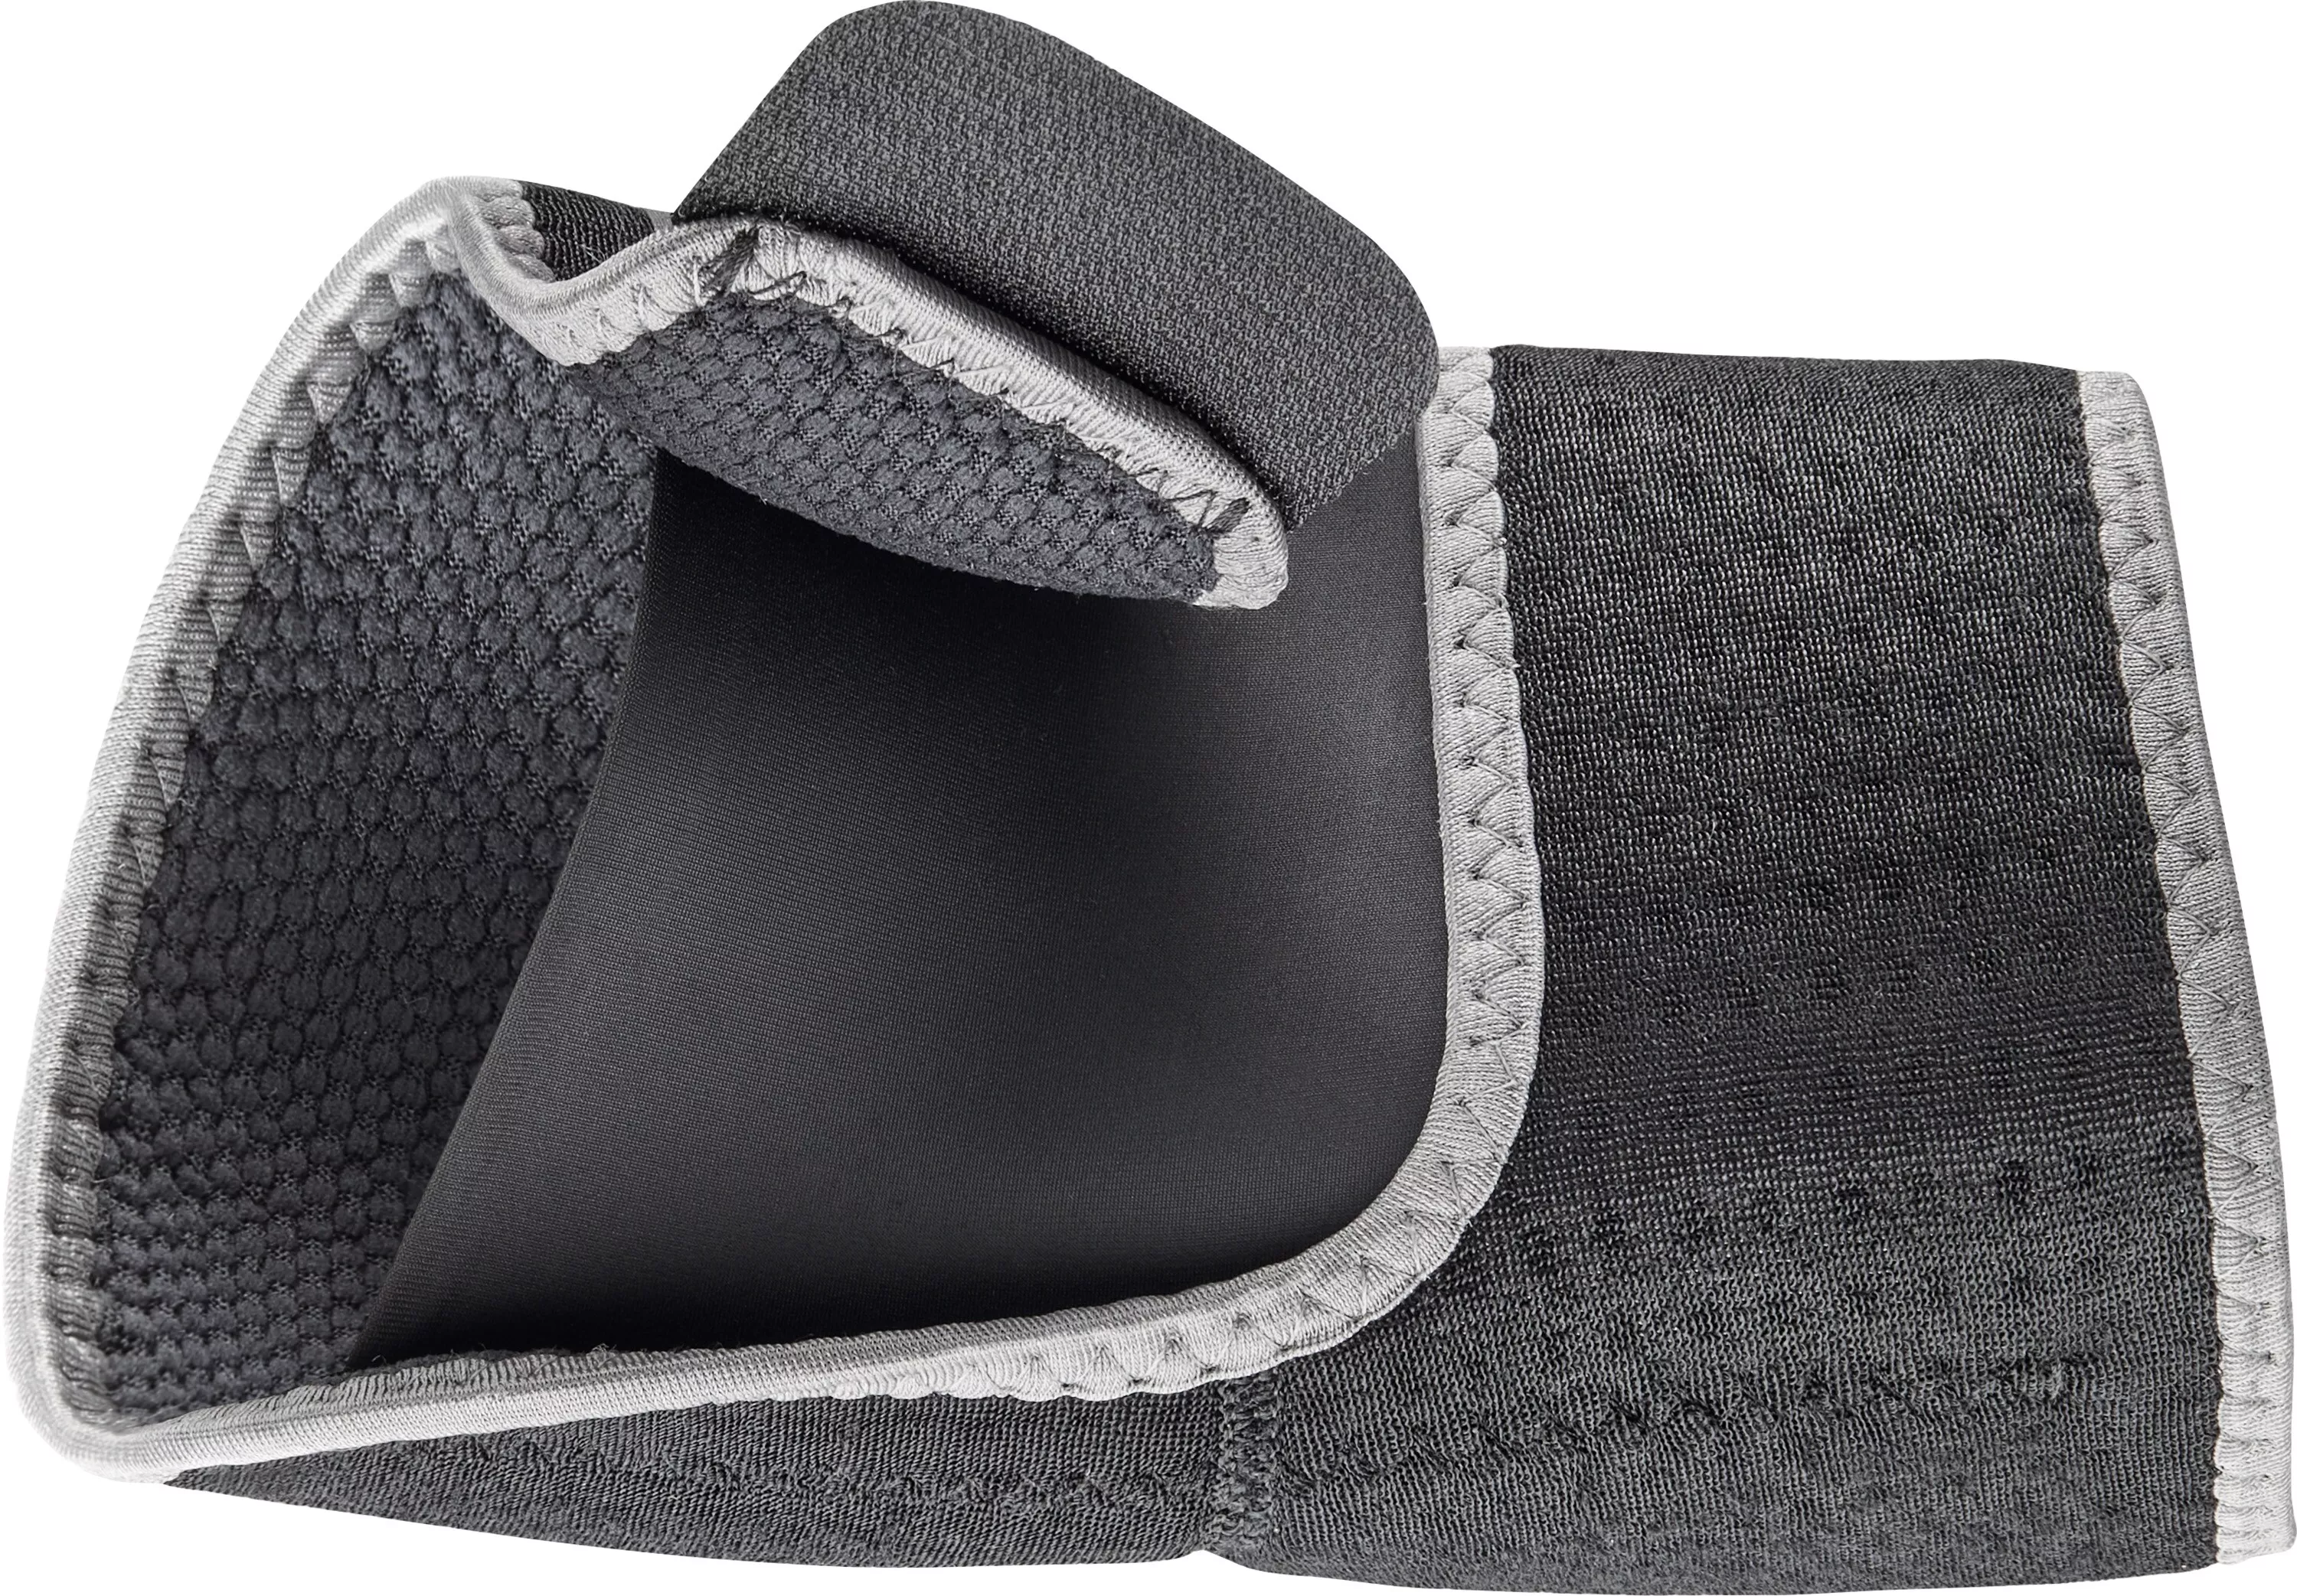 SKU 7100189583 | ACE™ Elbow Support 904004